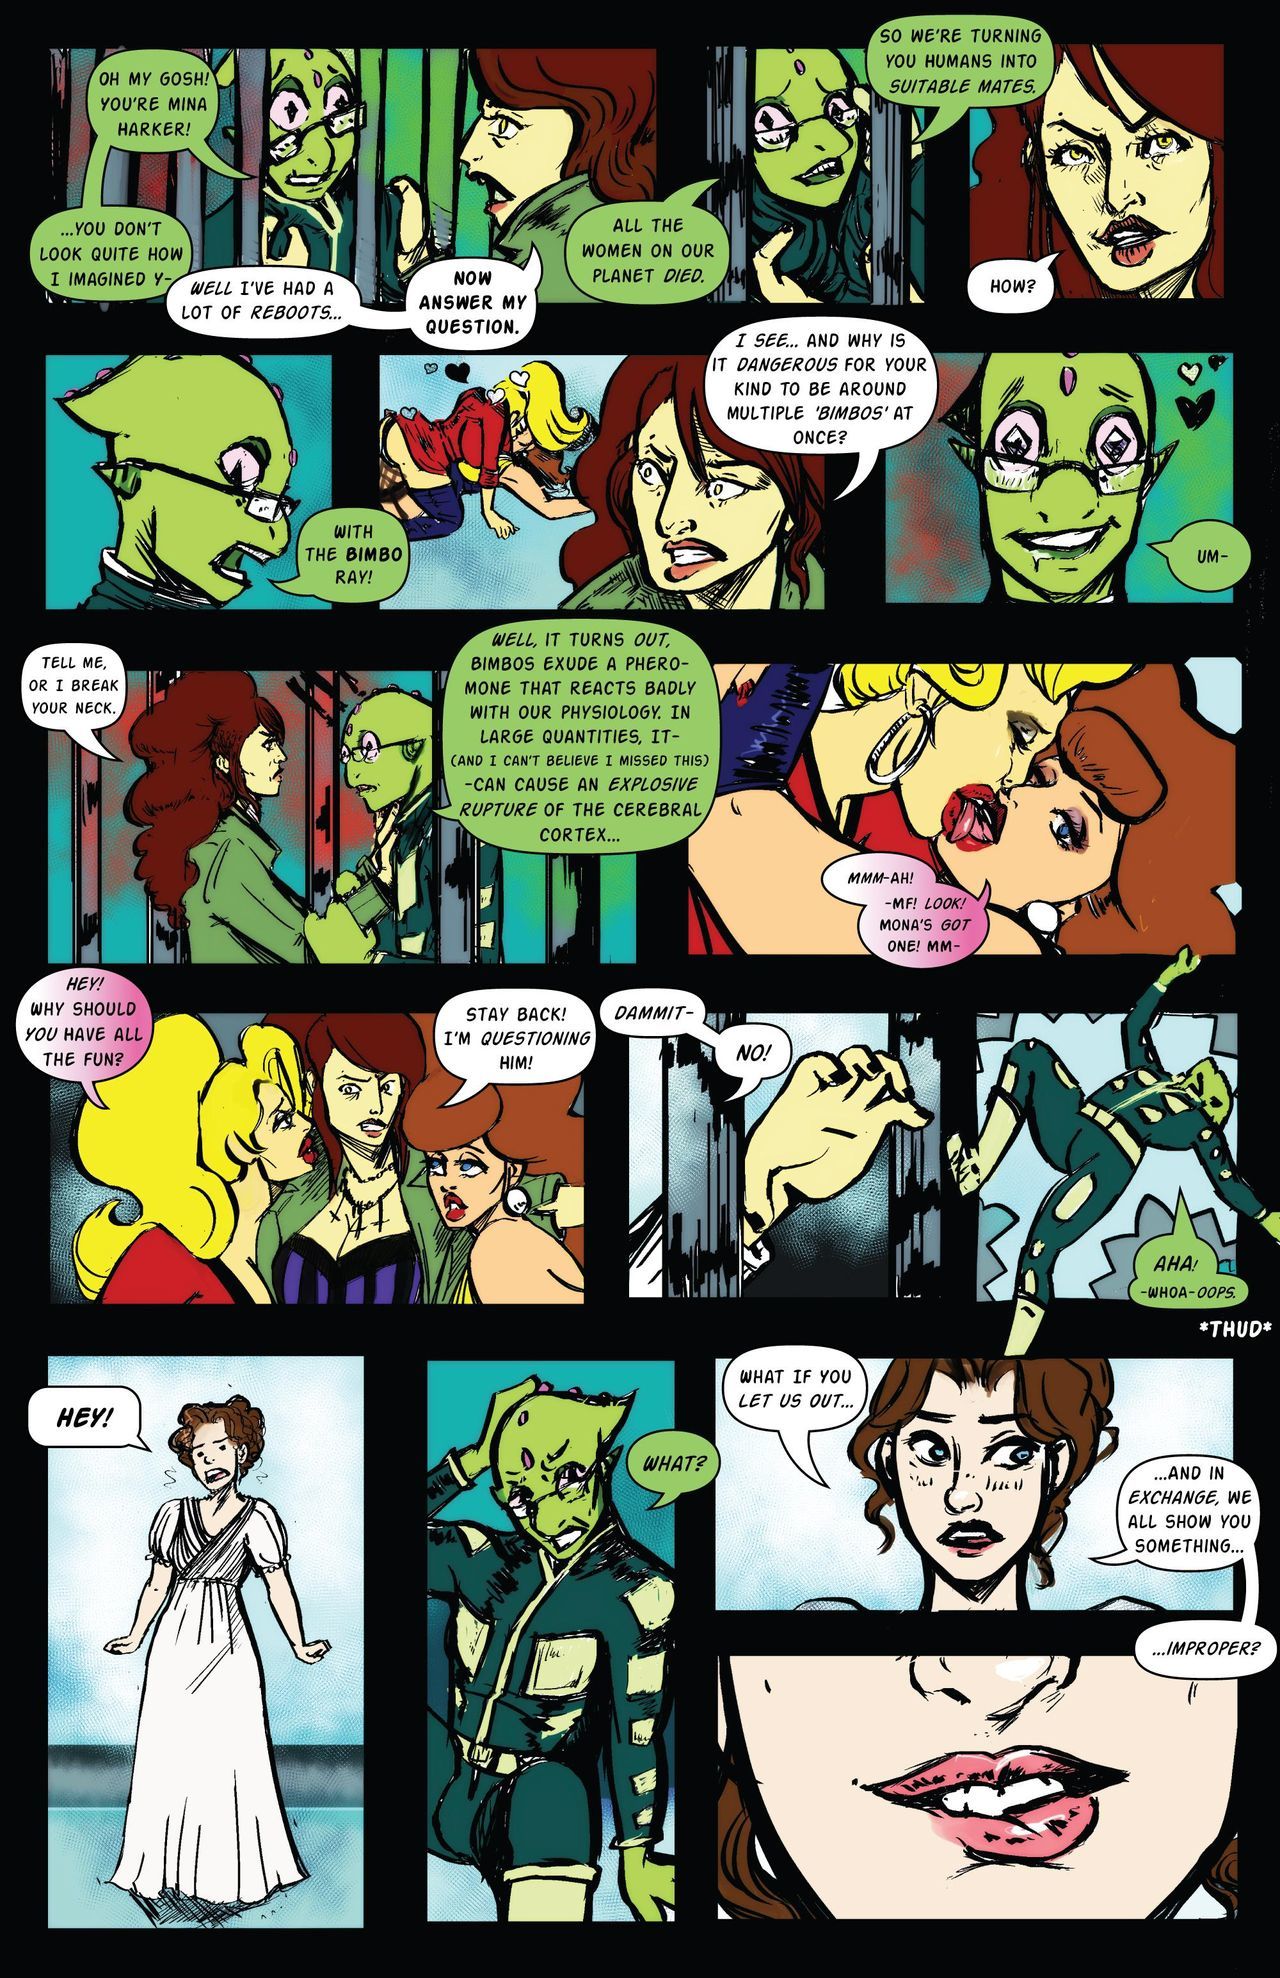 Bimbos in Space Titillation Initiation by Trampy-Hime page 7